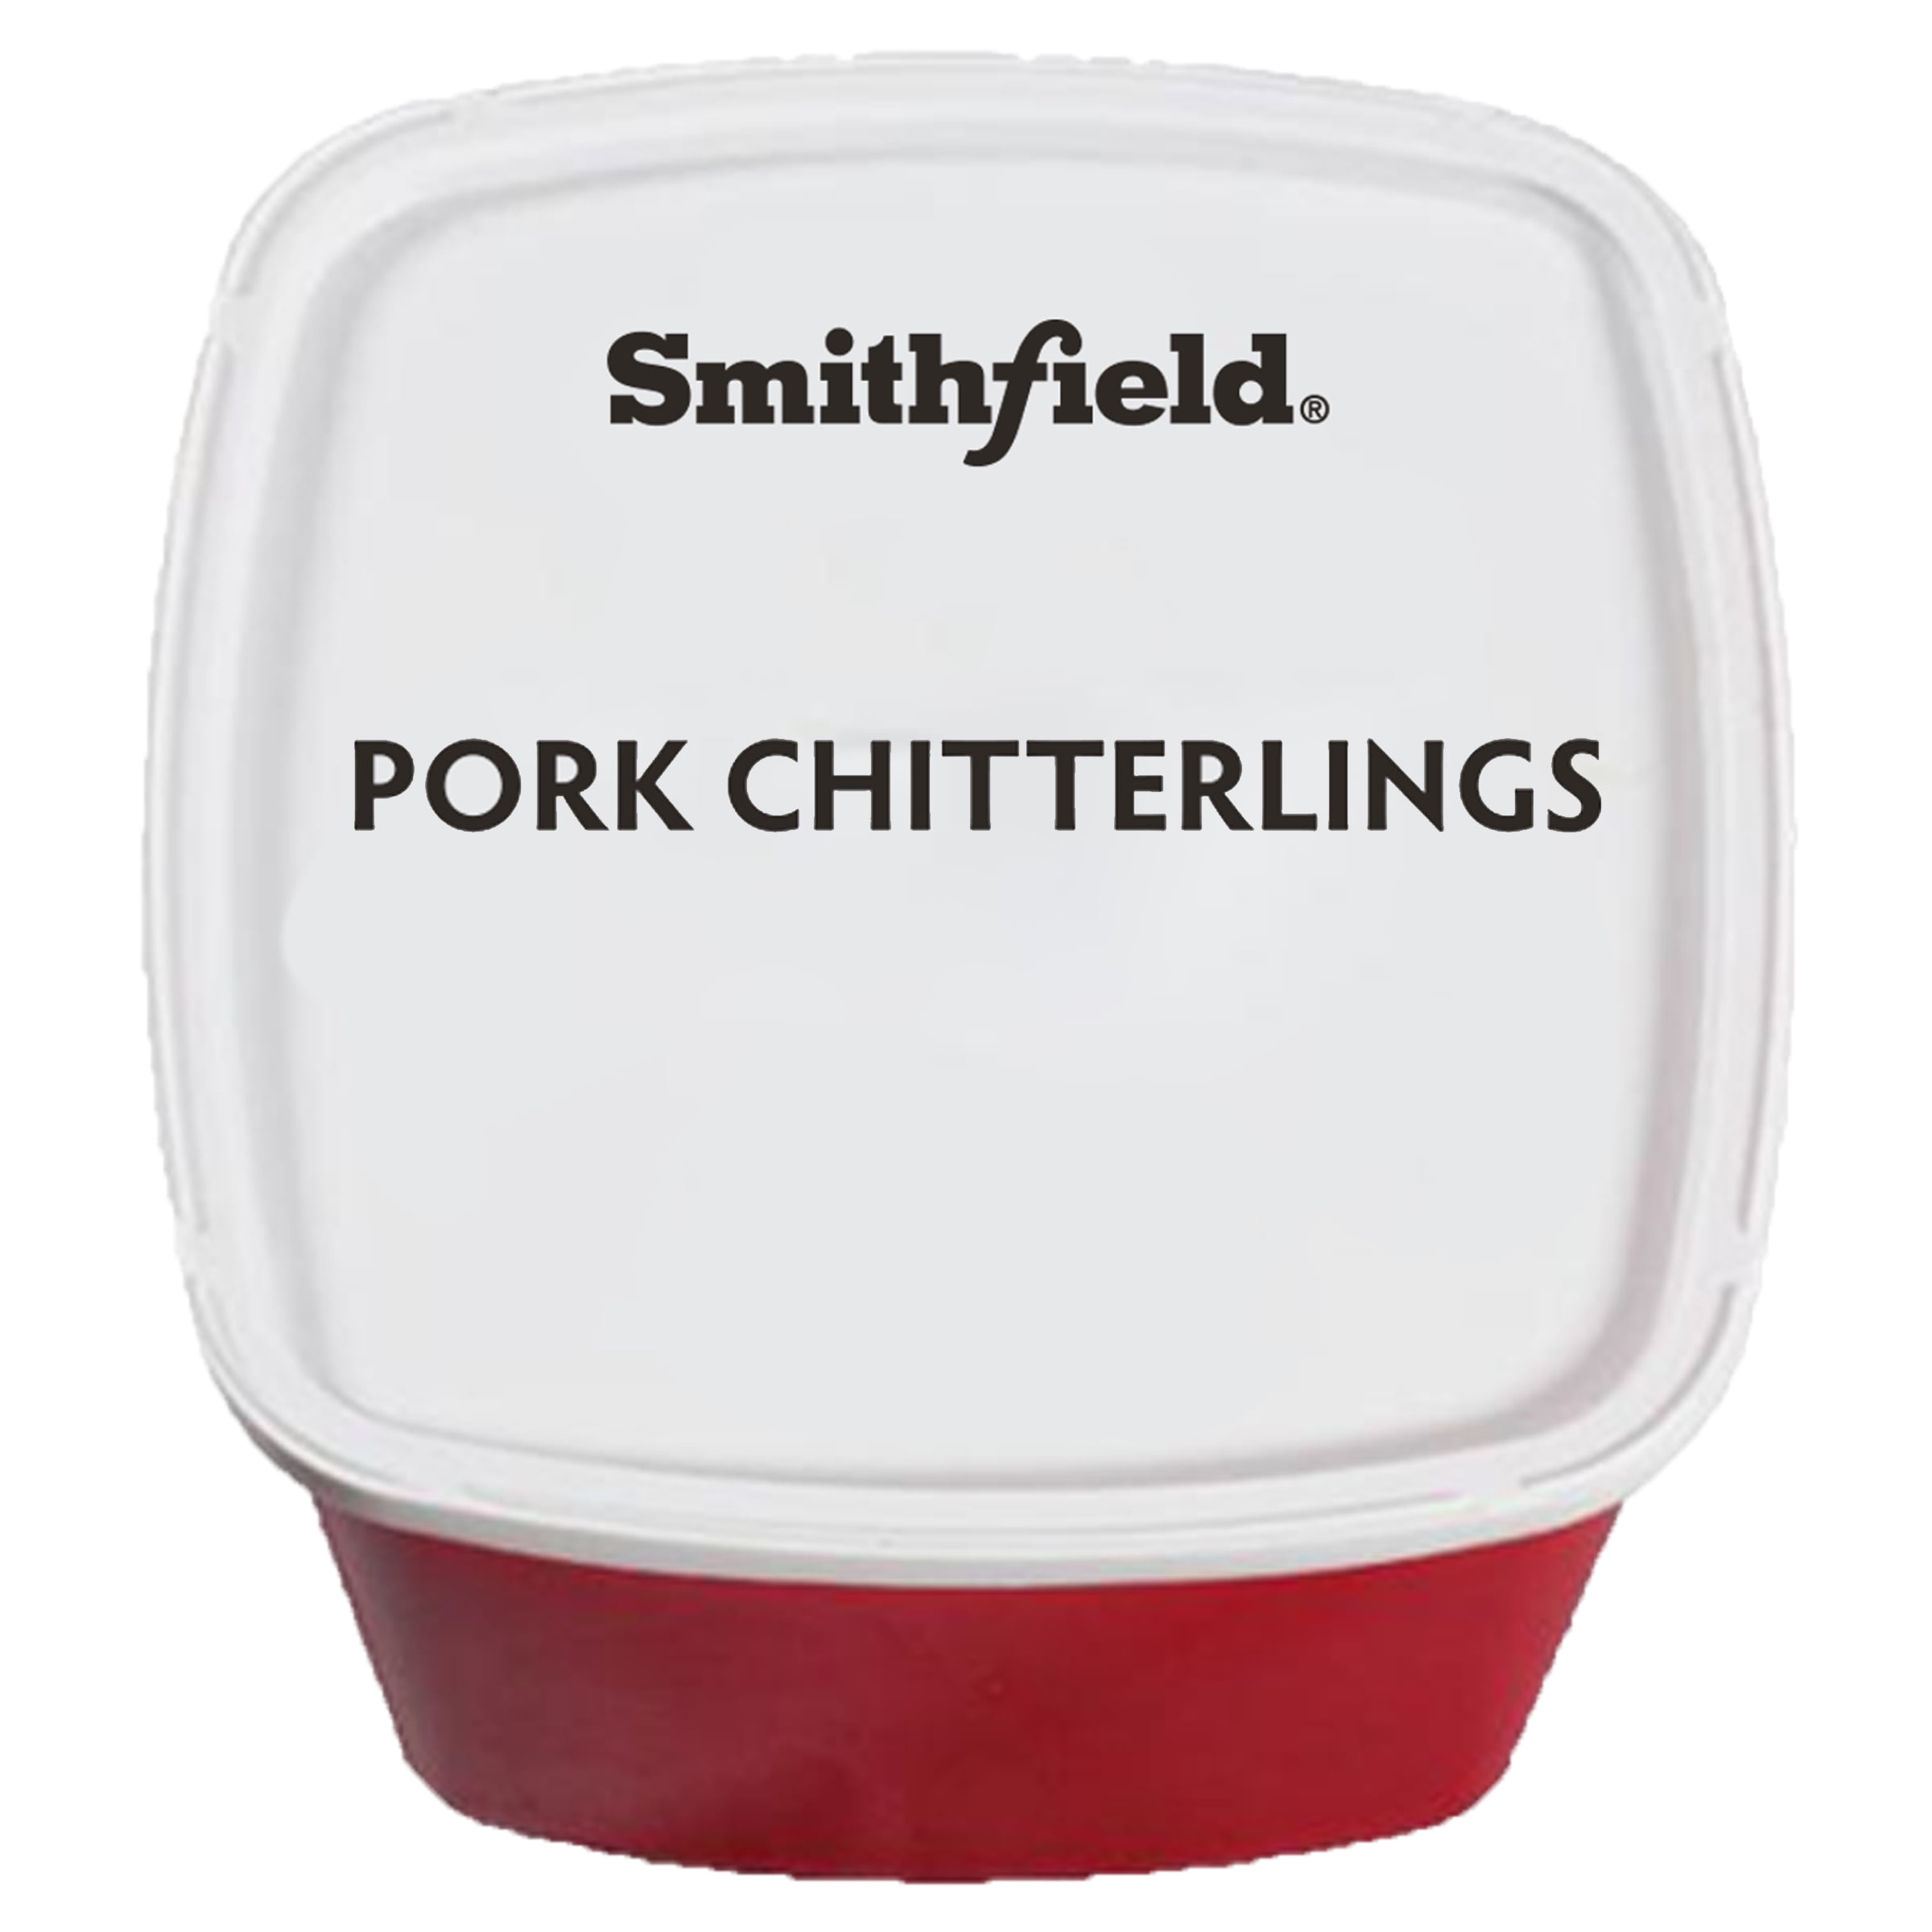 Rinse and repeat 100 times 😅 #chitterlings #smithfield #thanksgiving , chitterlings